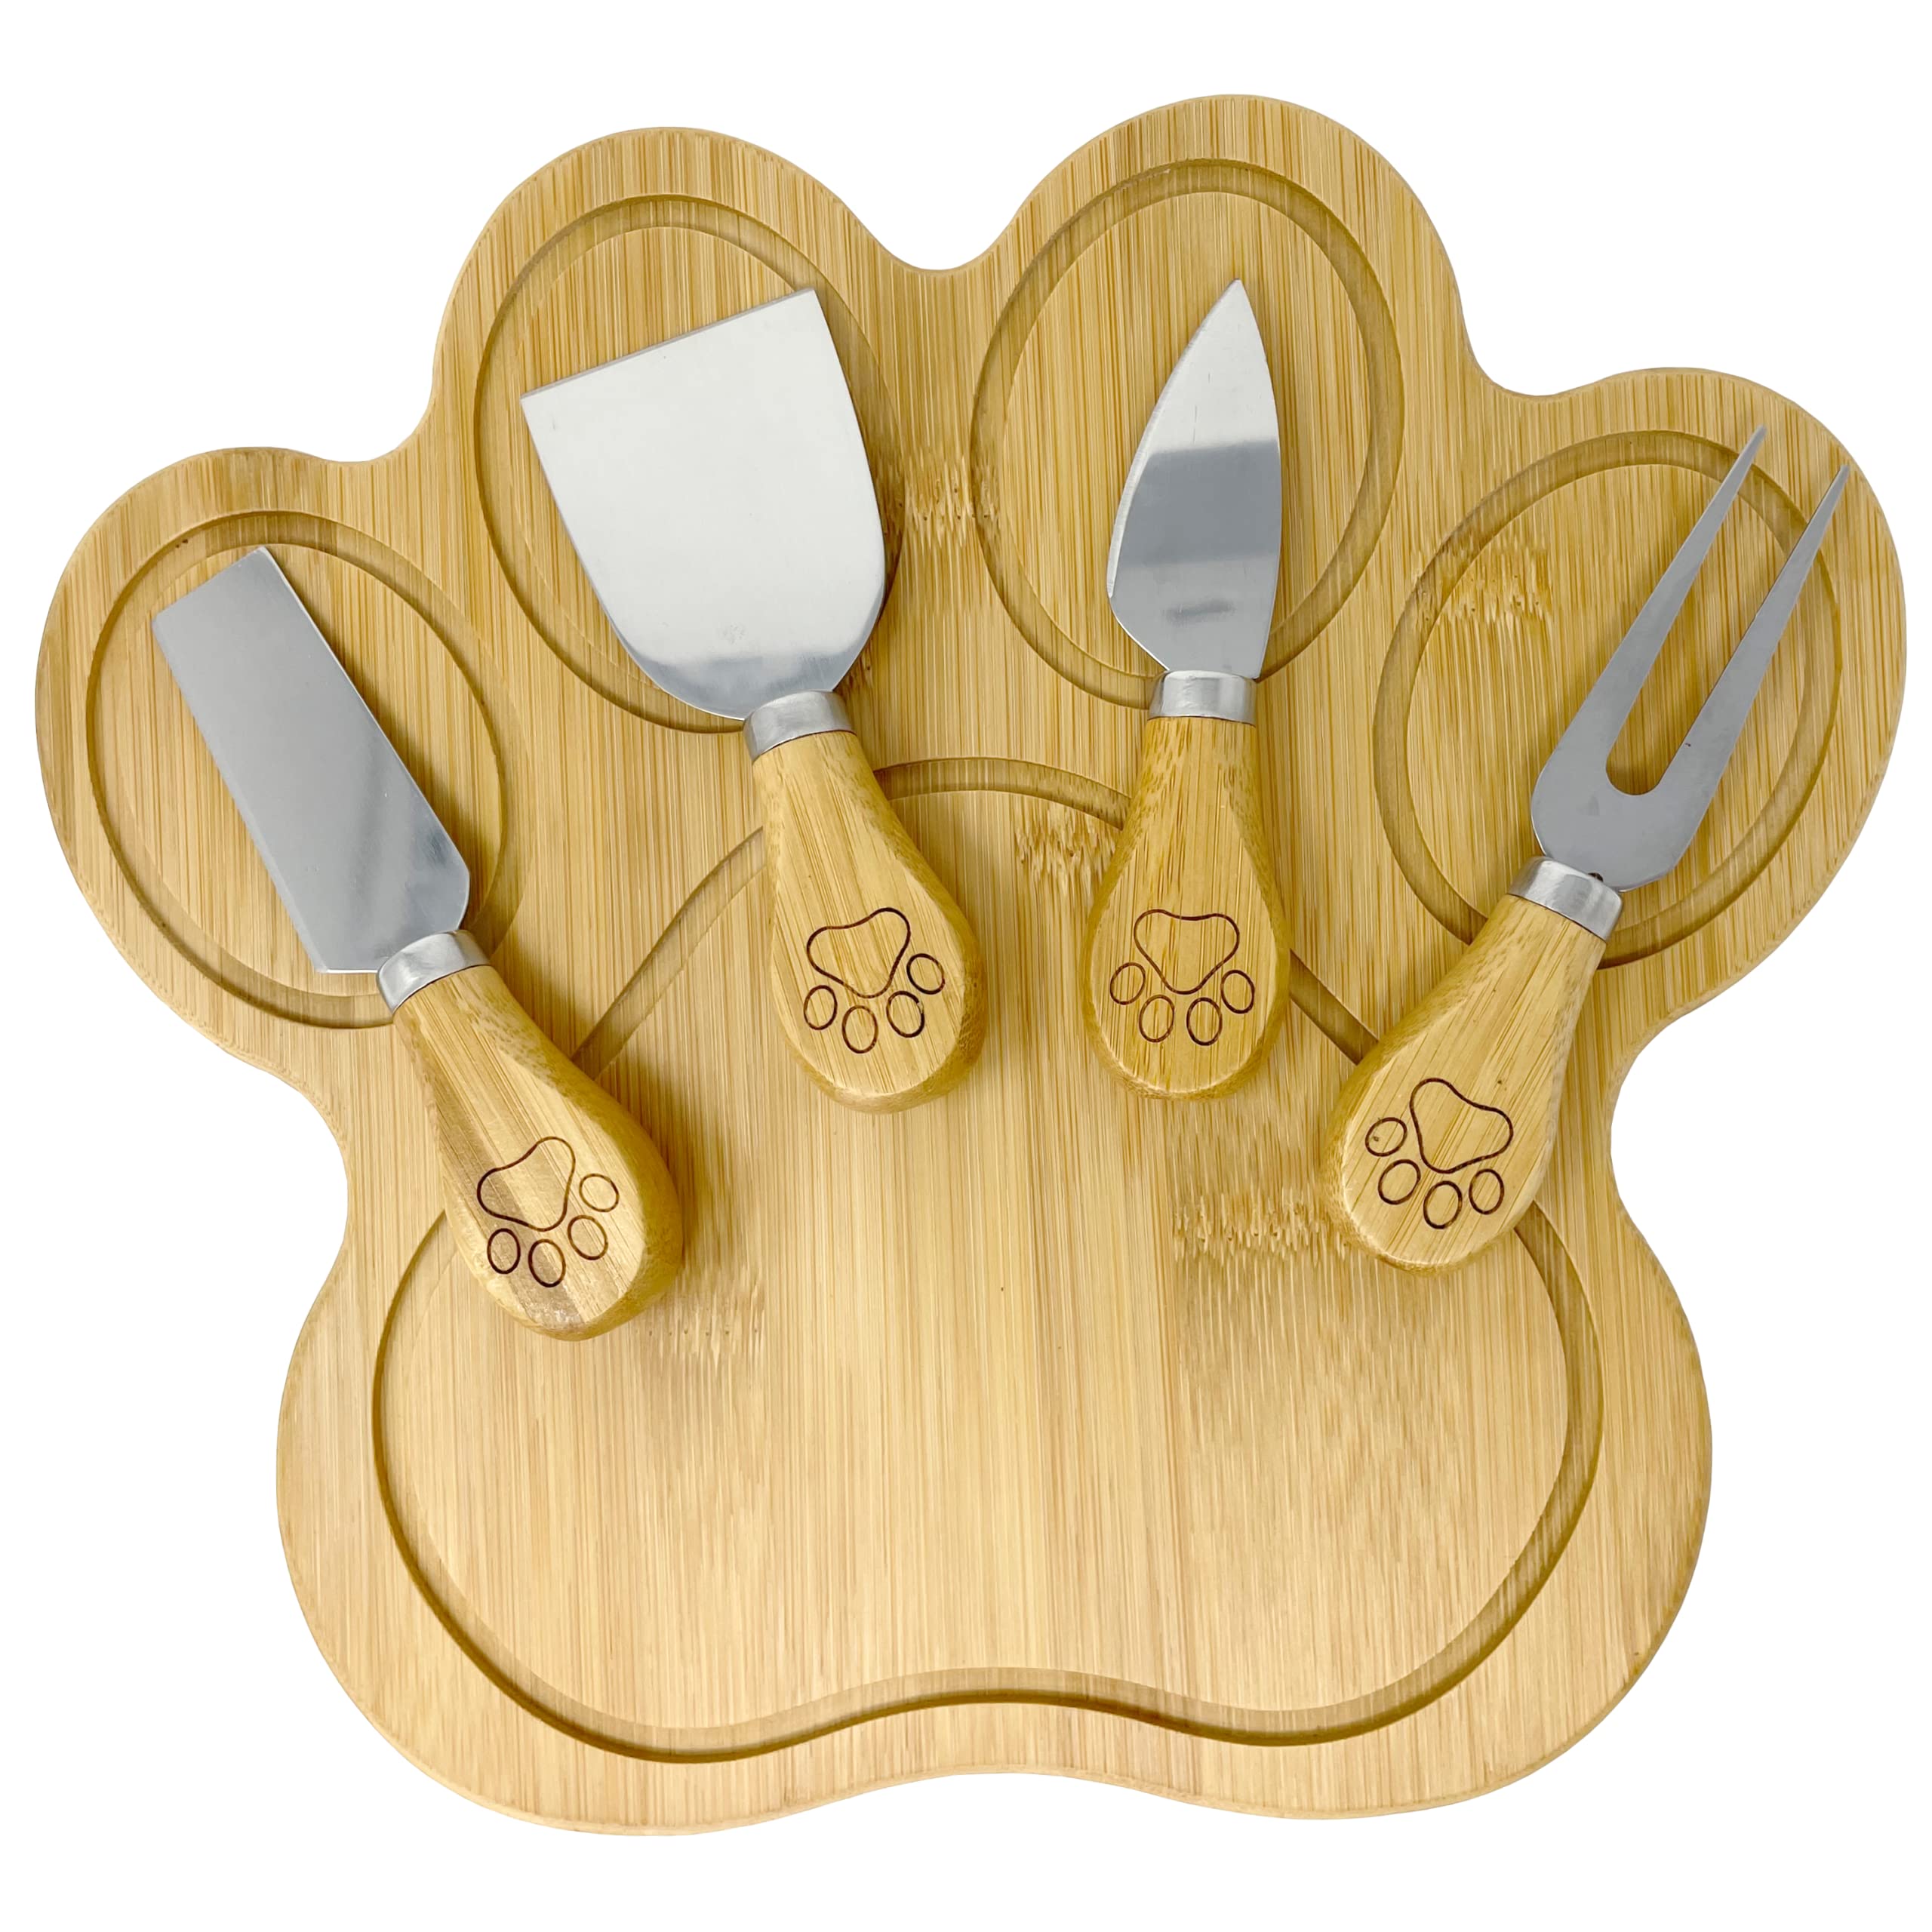 Shangrun Paw Shaped Bamboo Wood Serving Board With Bonus 4 Matching Spreaders Gift Set